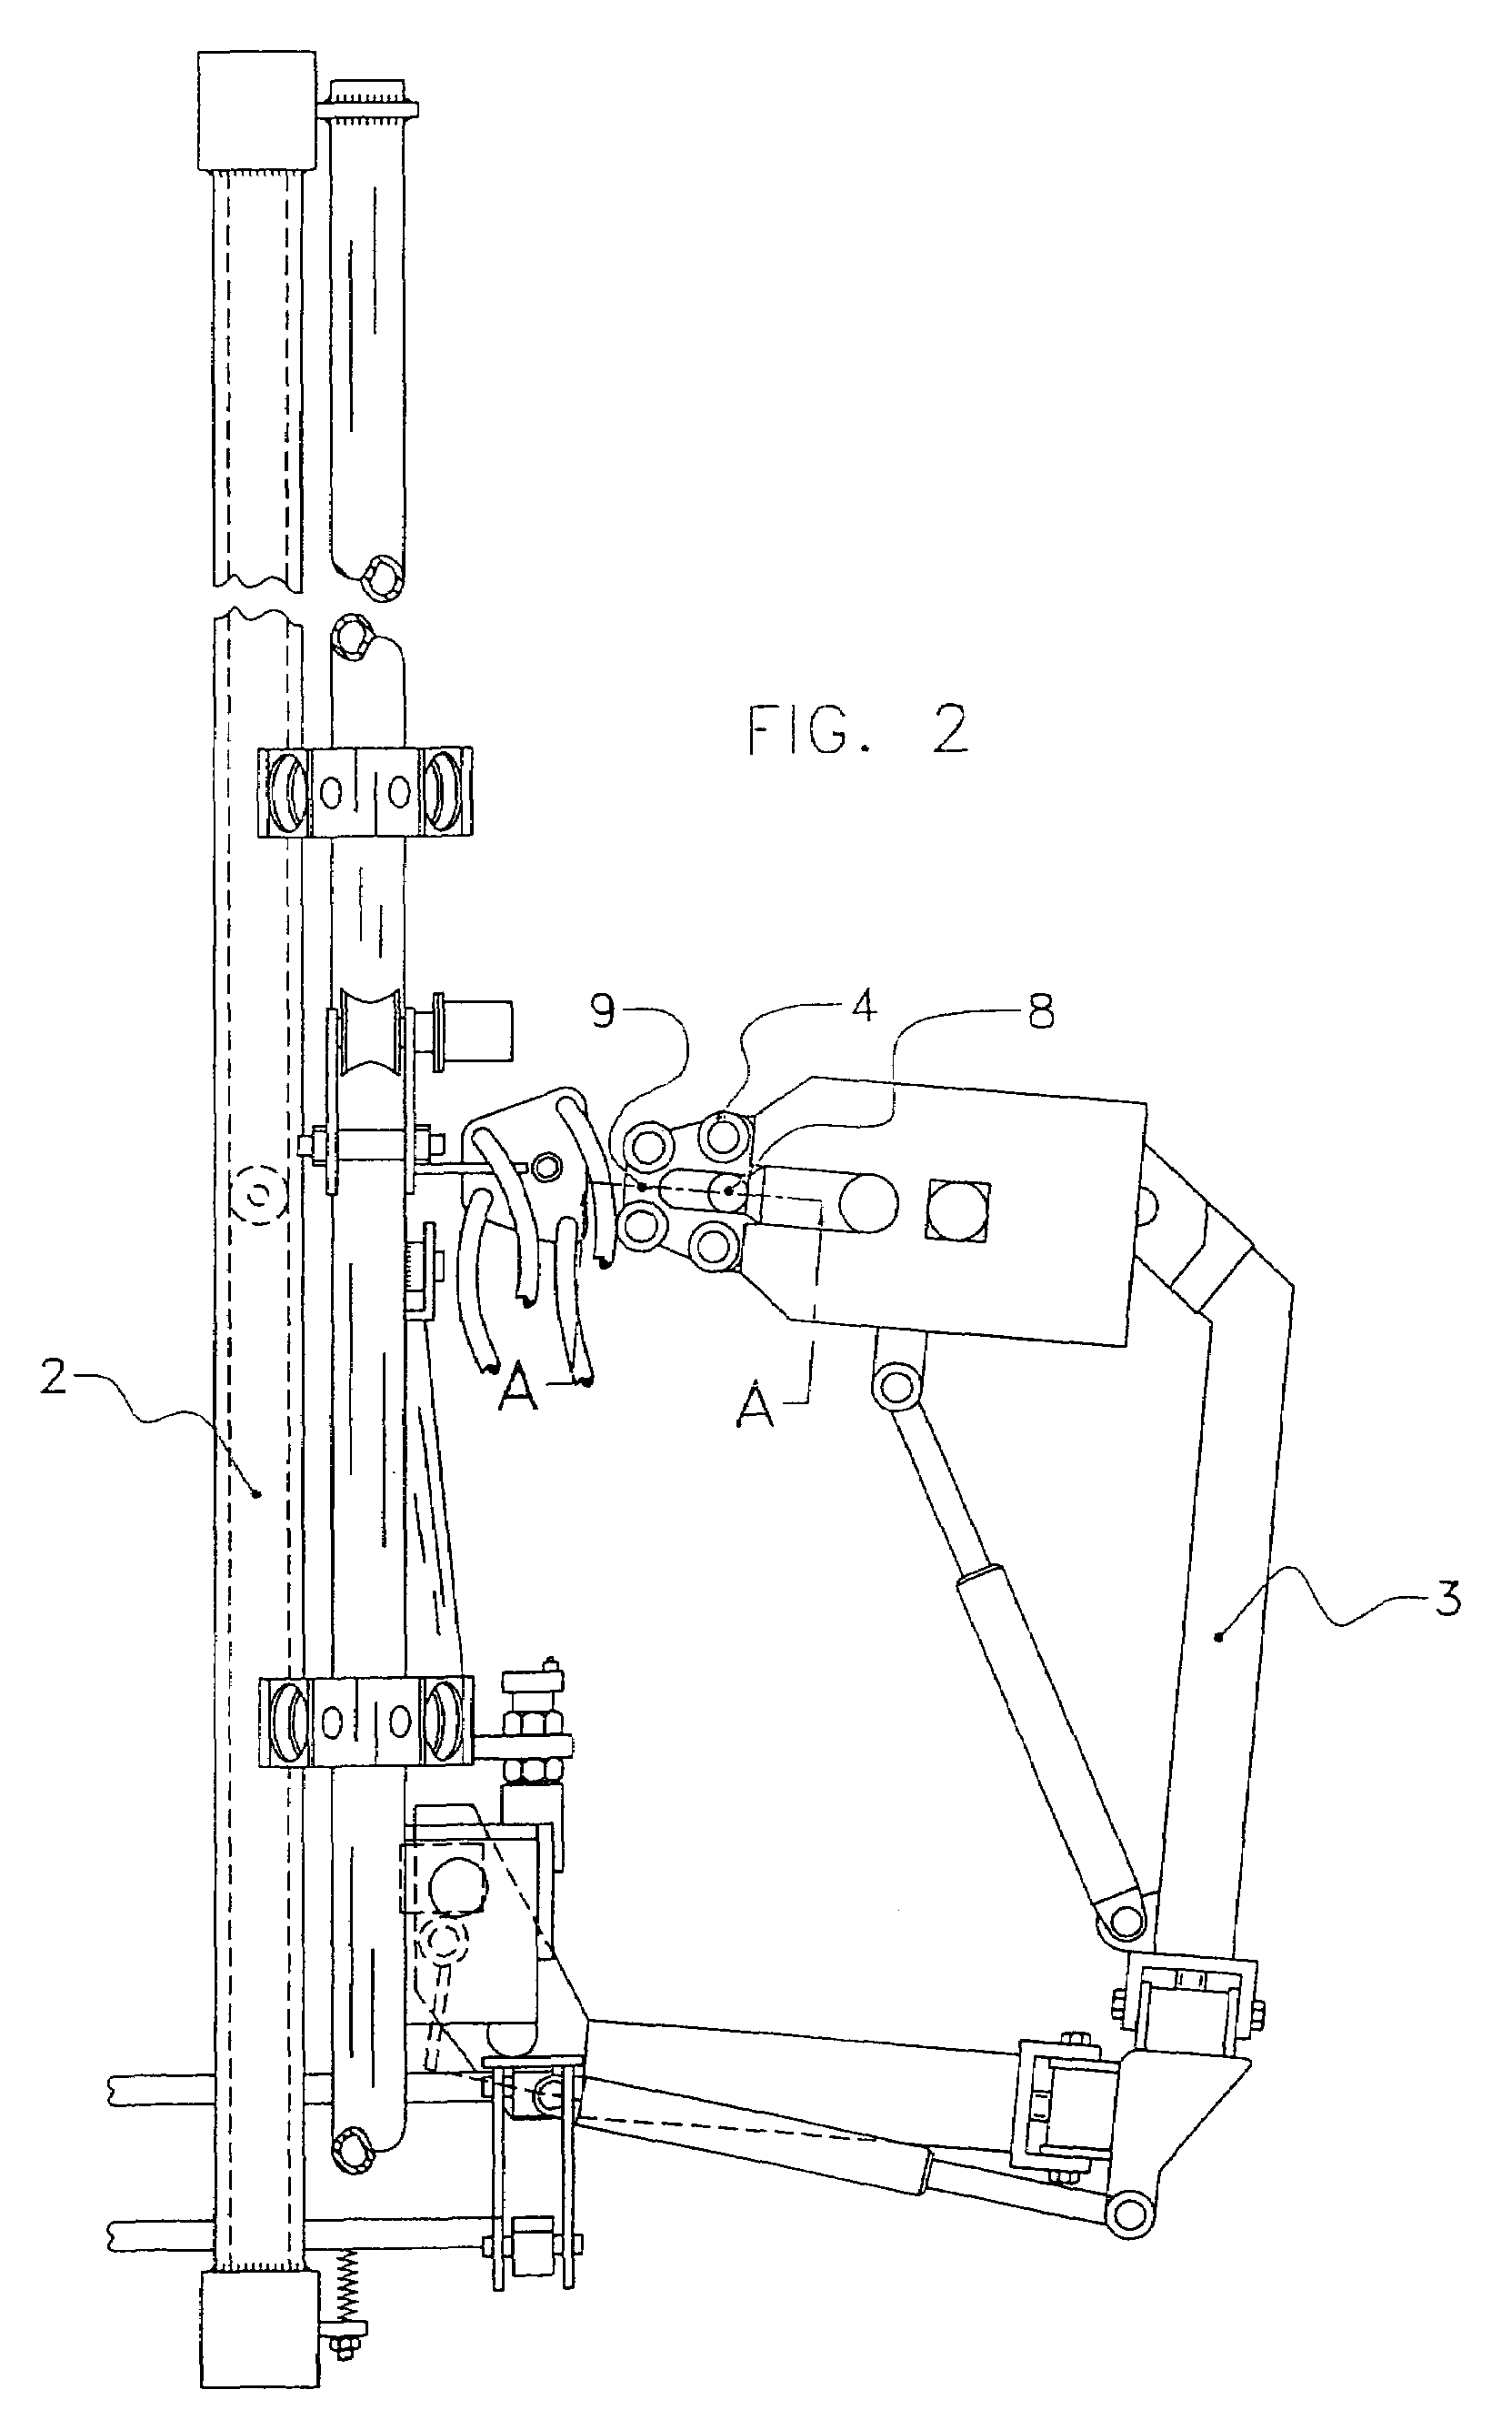 Device and method for determining teat positions